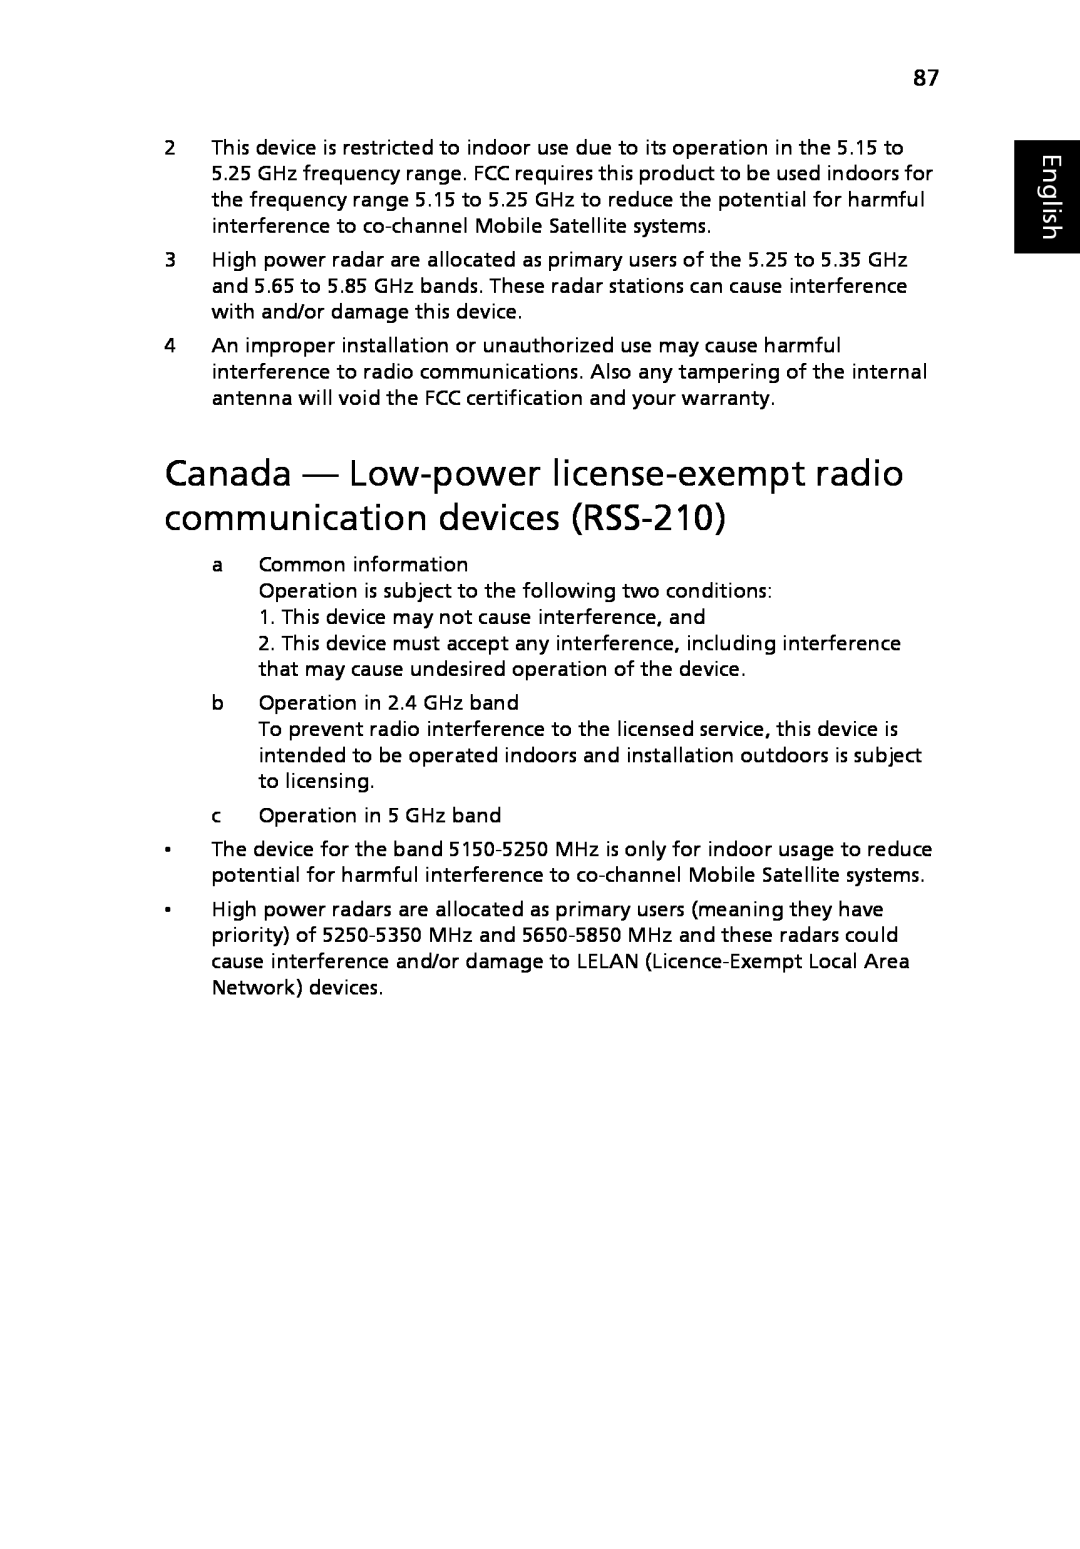 Acer MS2219, 4920 manual Canada - Low-power license-exempt radio communication devices RSS-210, English 